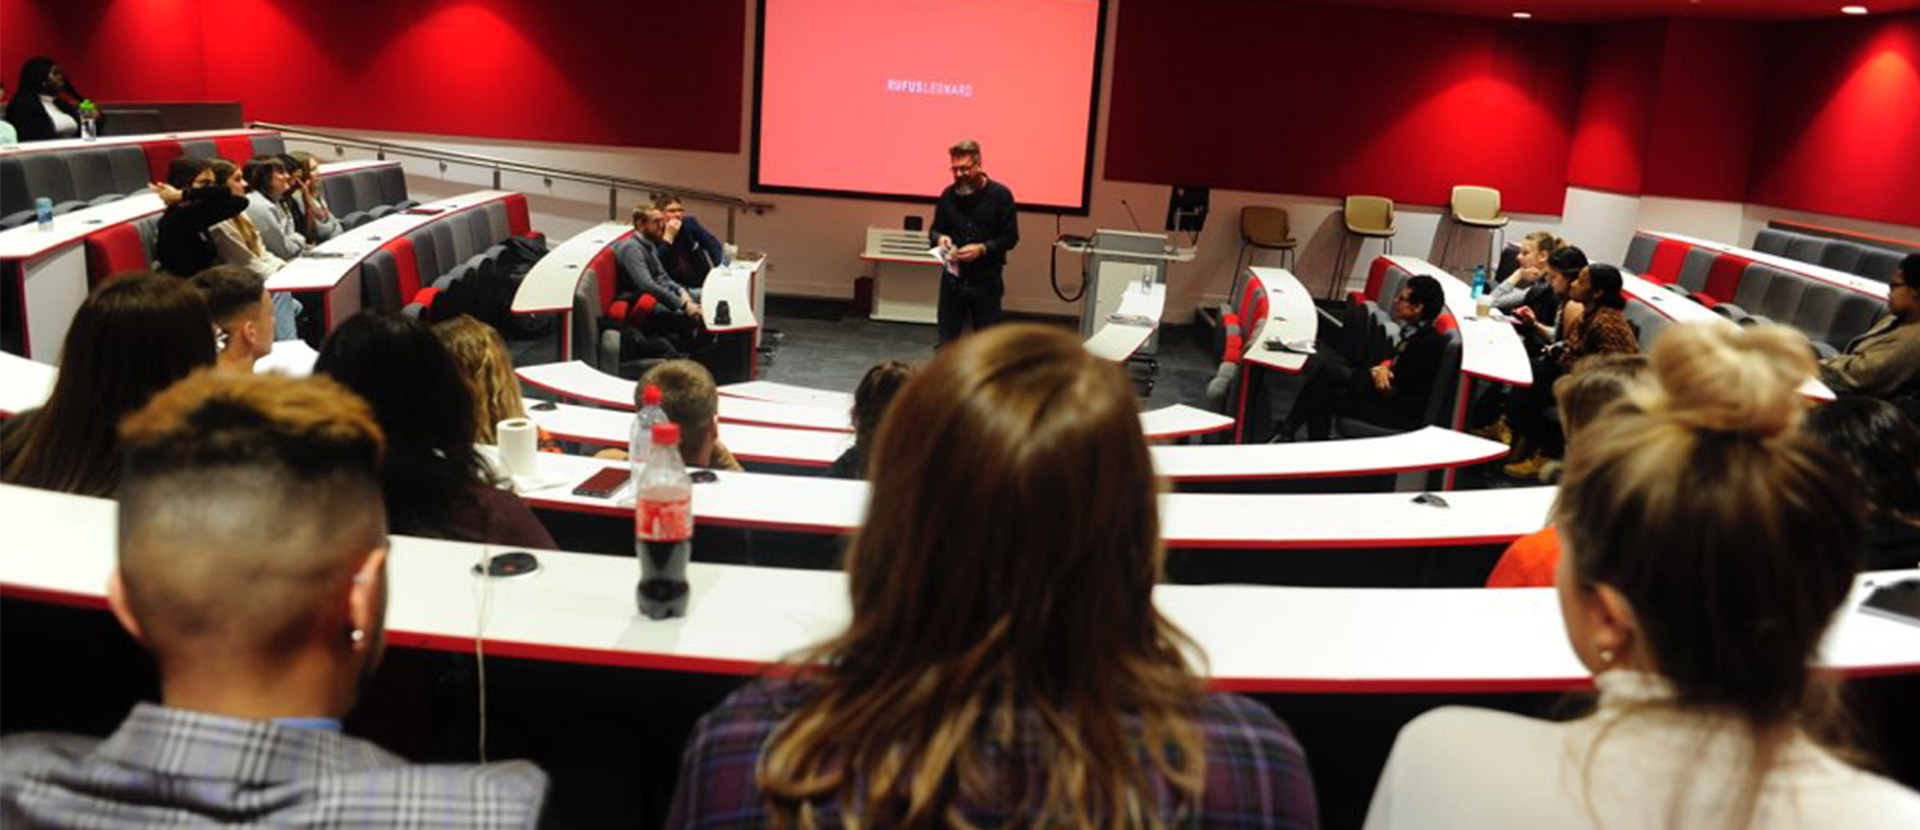 Students in the lecture theatre during the meet the professionals event